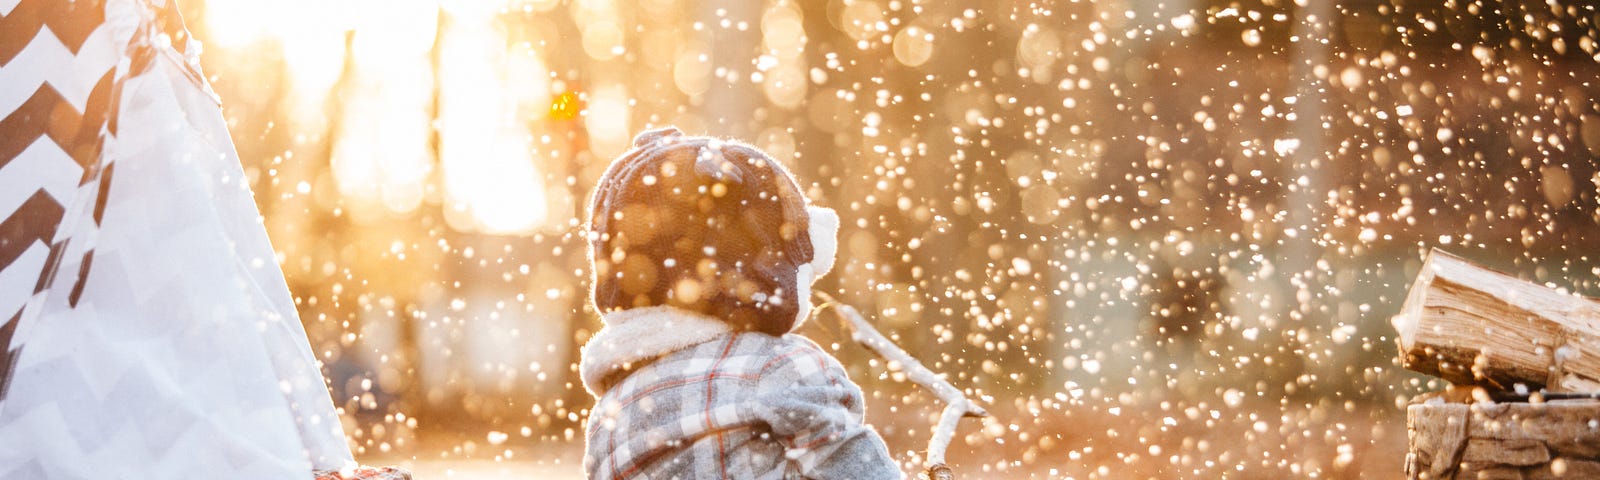 A child outside near a play tent, in golden light with glittering snow all around